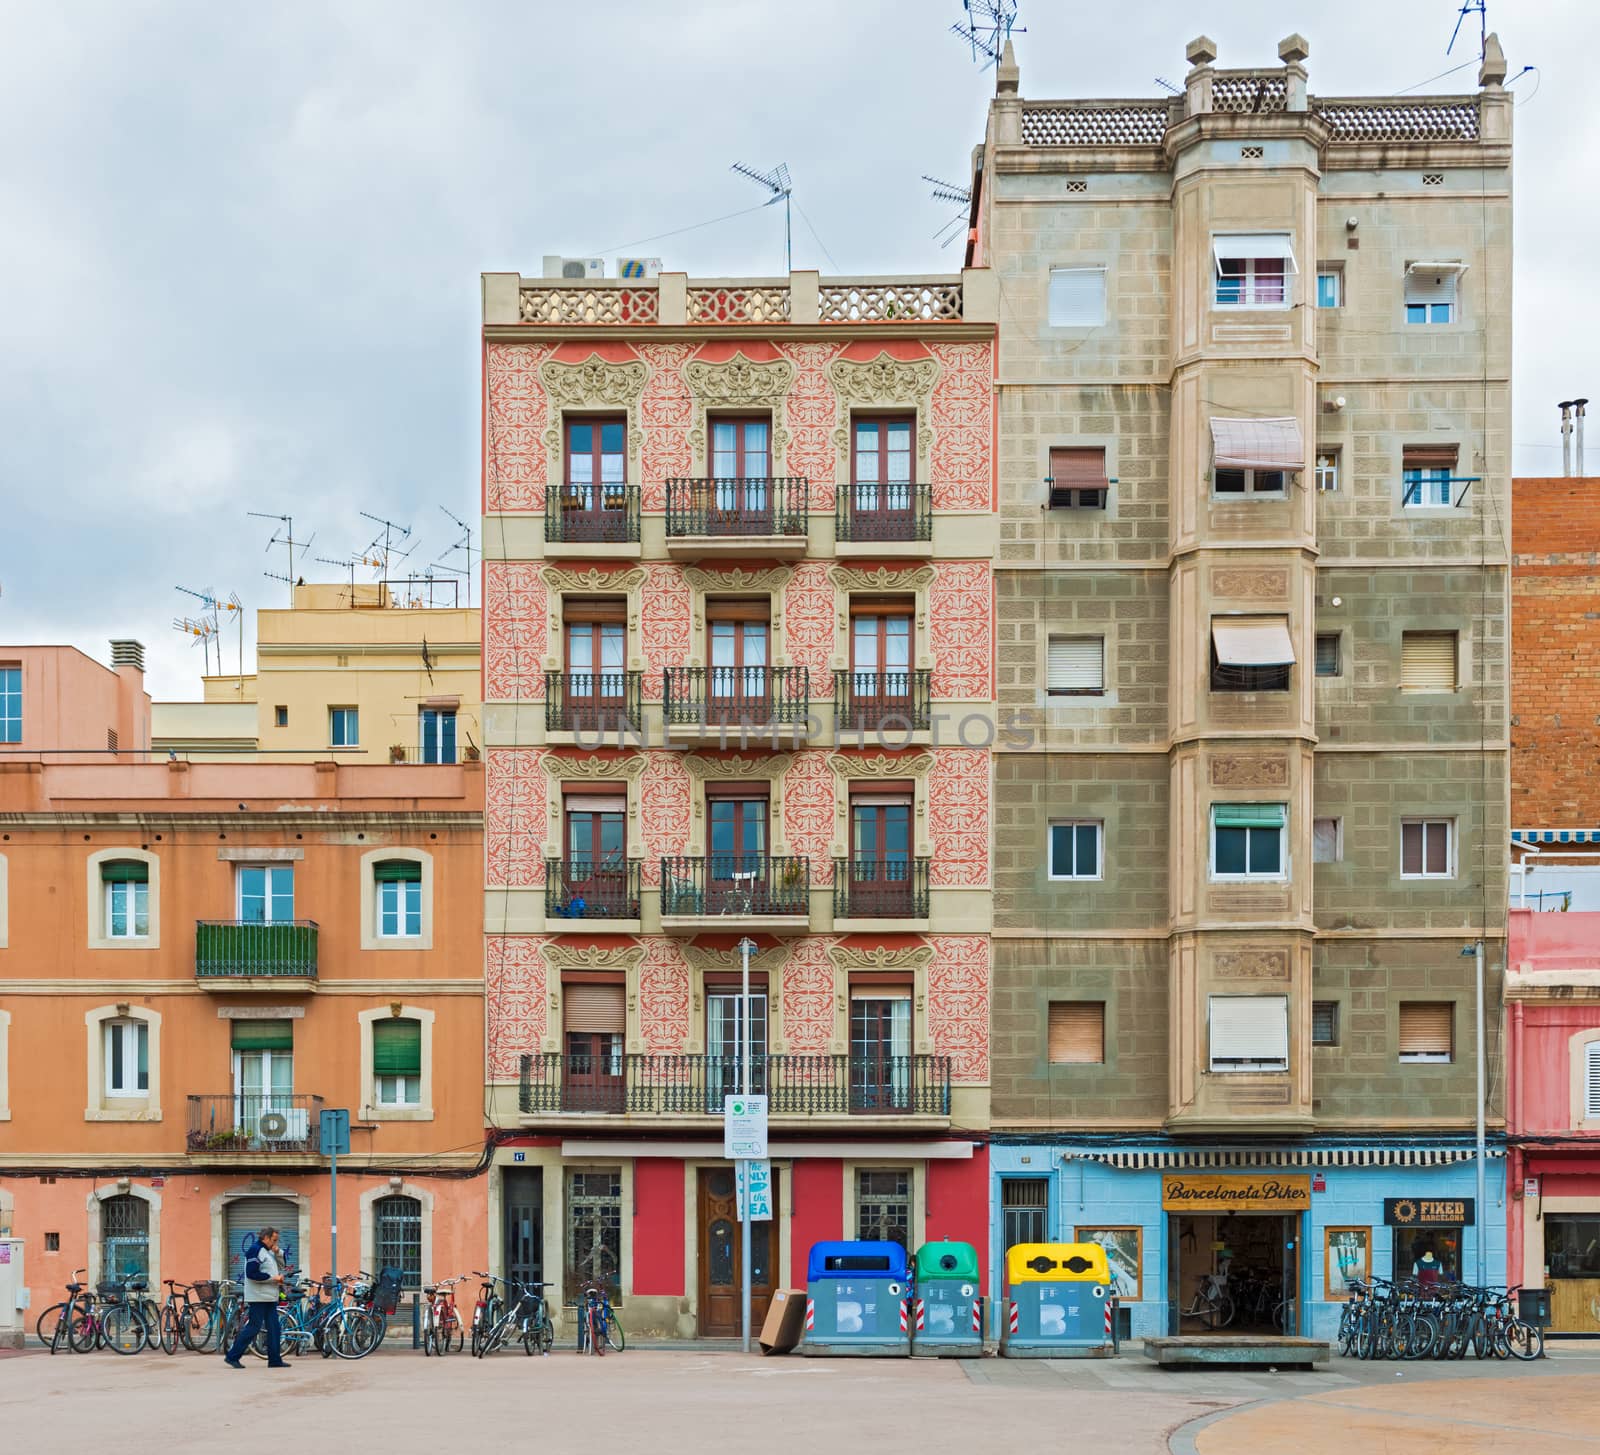 Facade of the old houses in Barcelona, Spain by Marcus